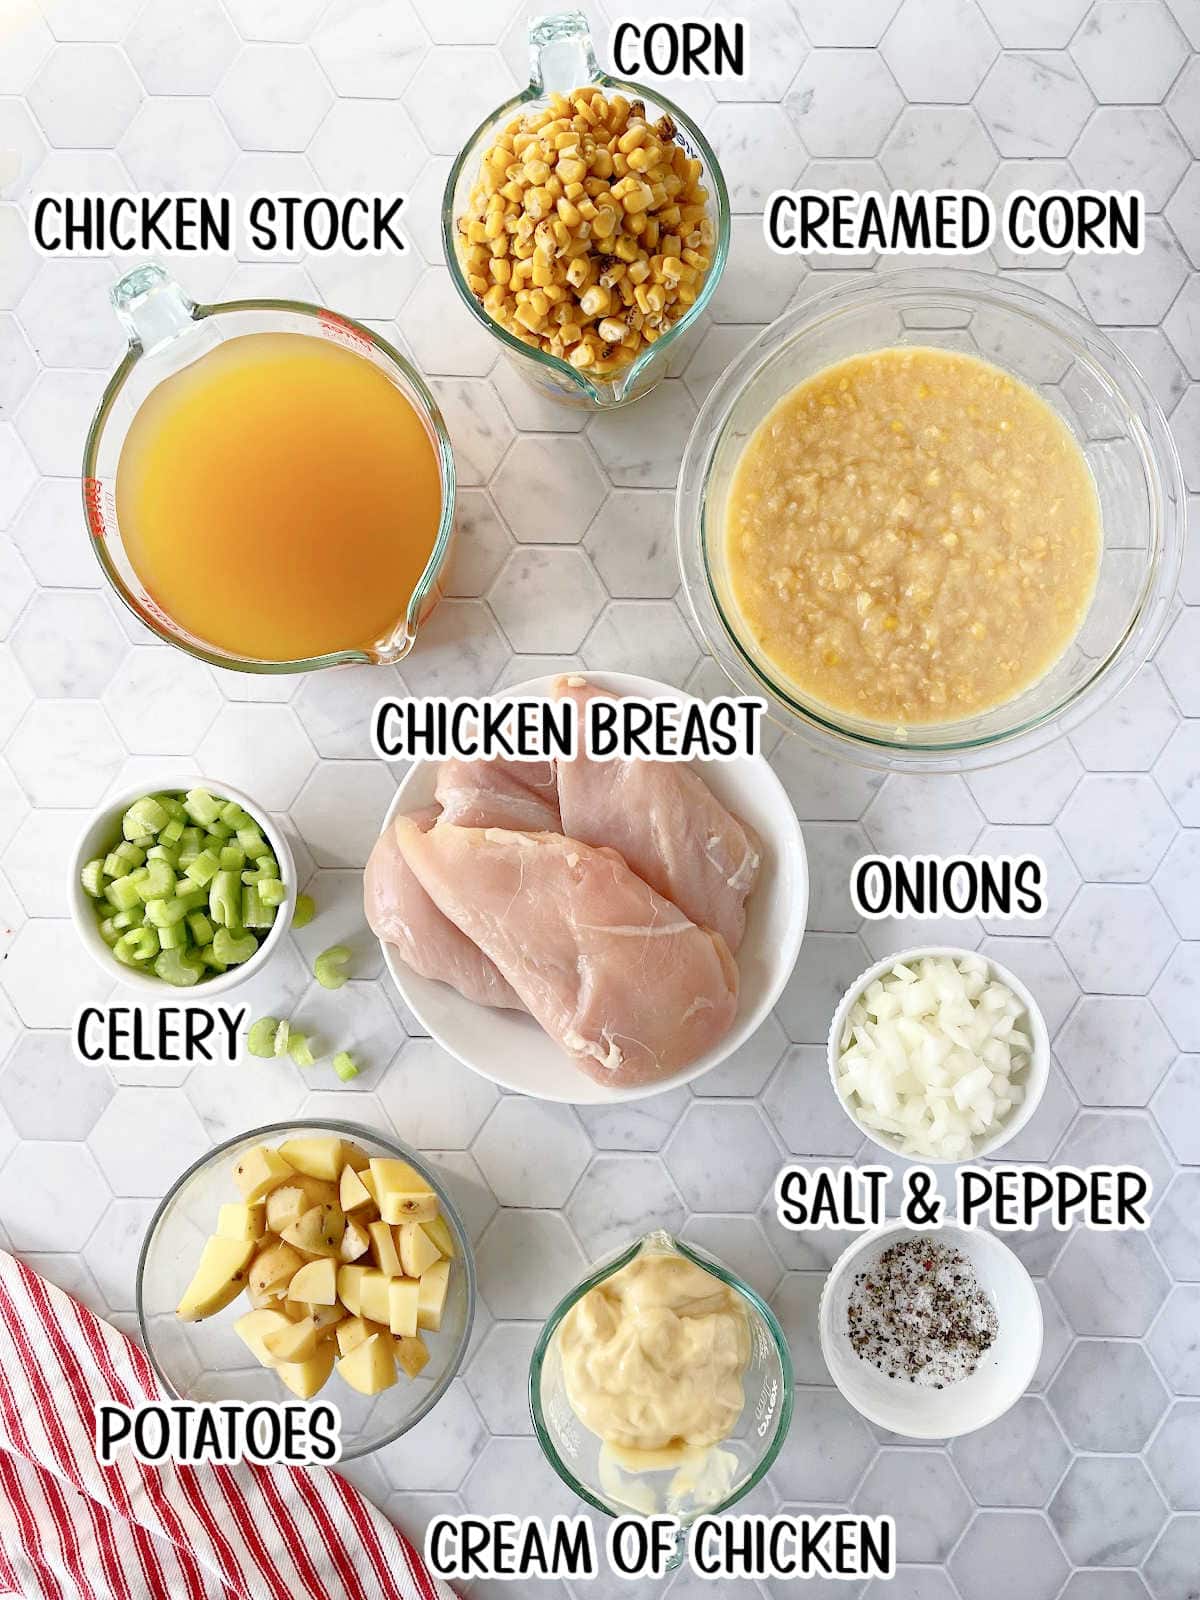 Labeled ingredients for this recipe.